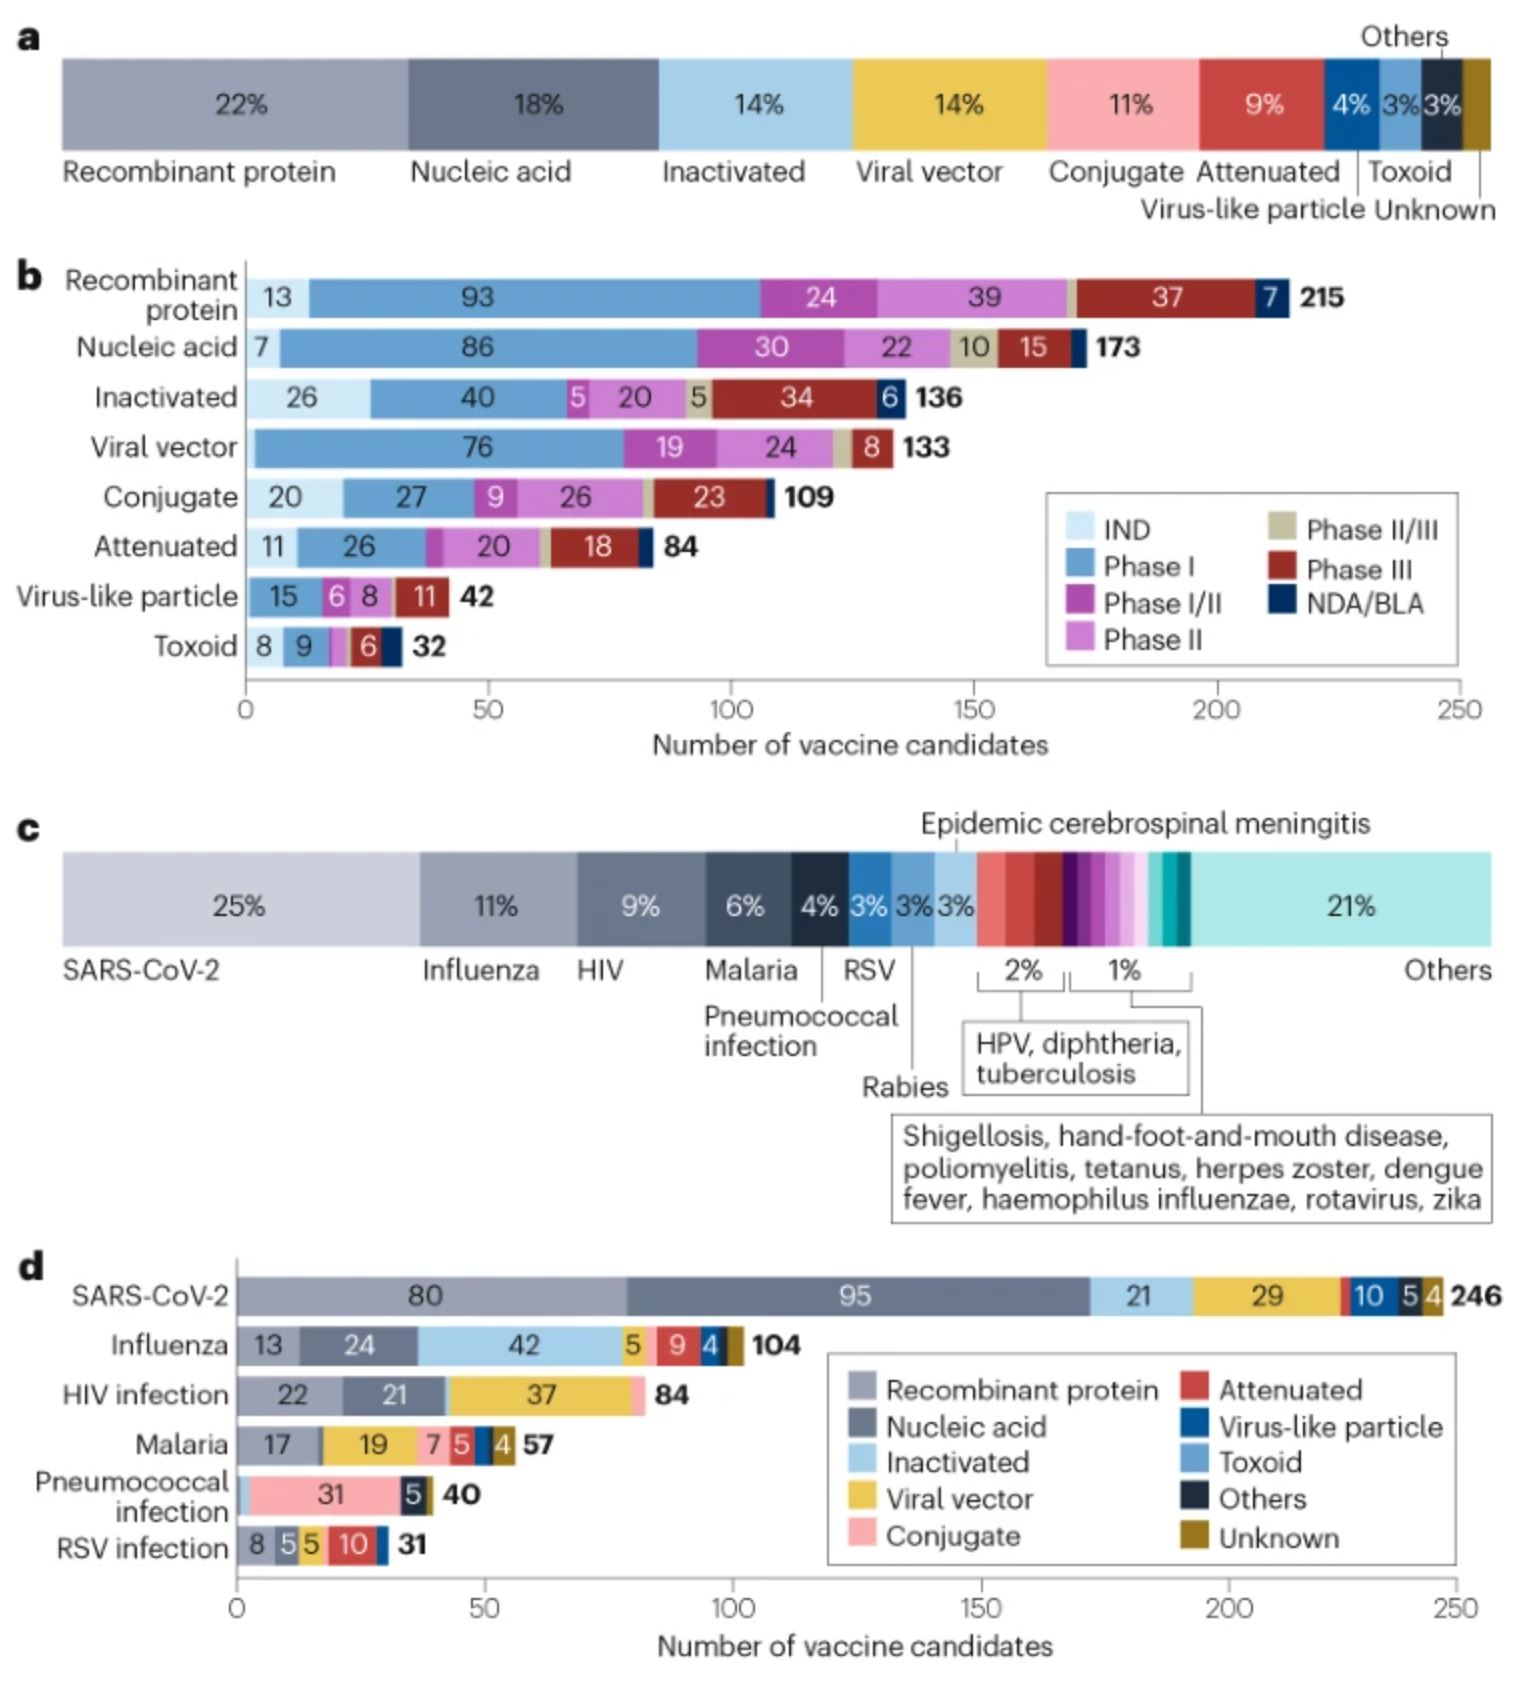 The R&D landscape for infectious disease vaccines